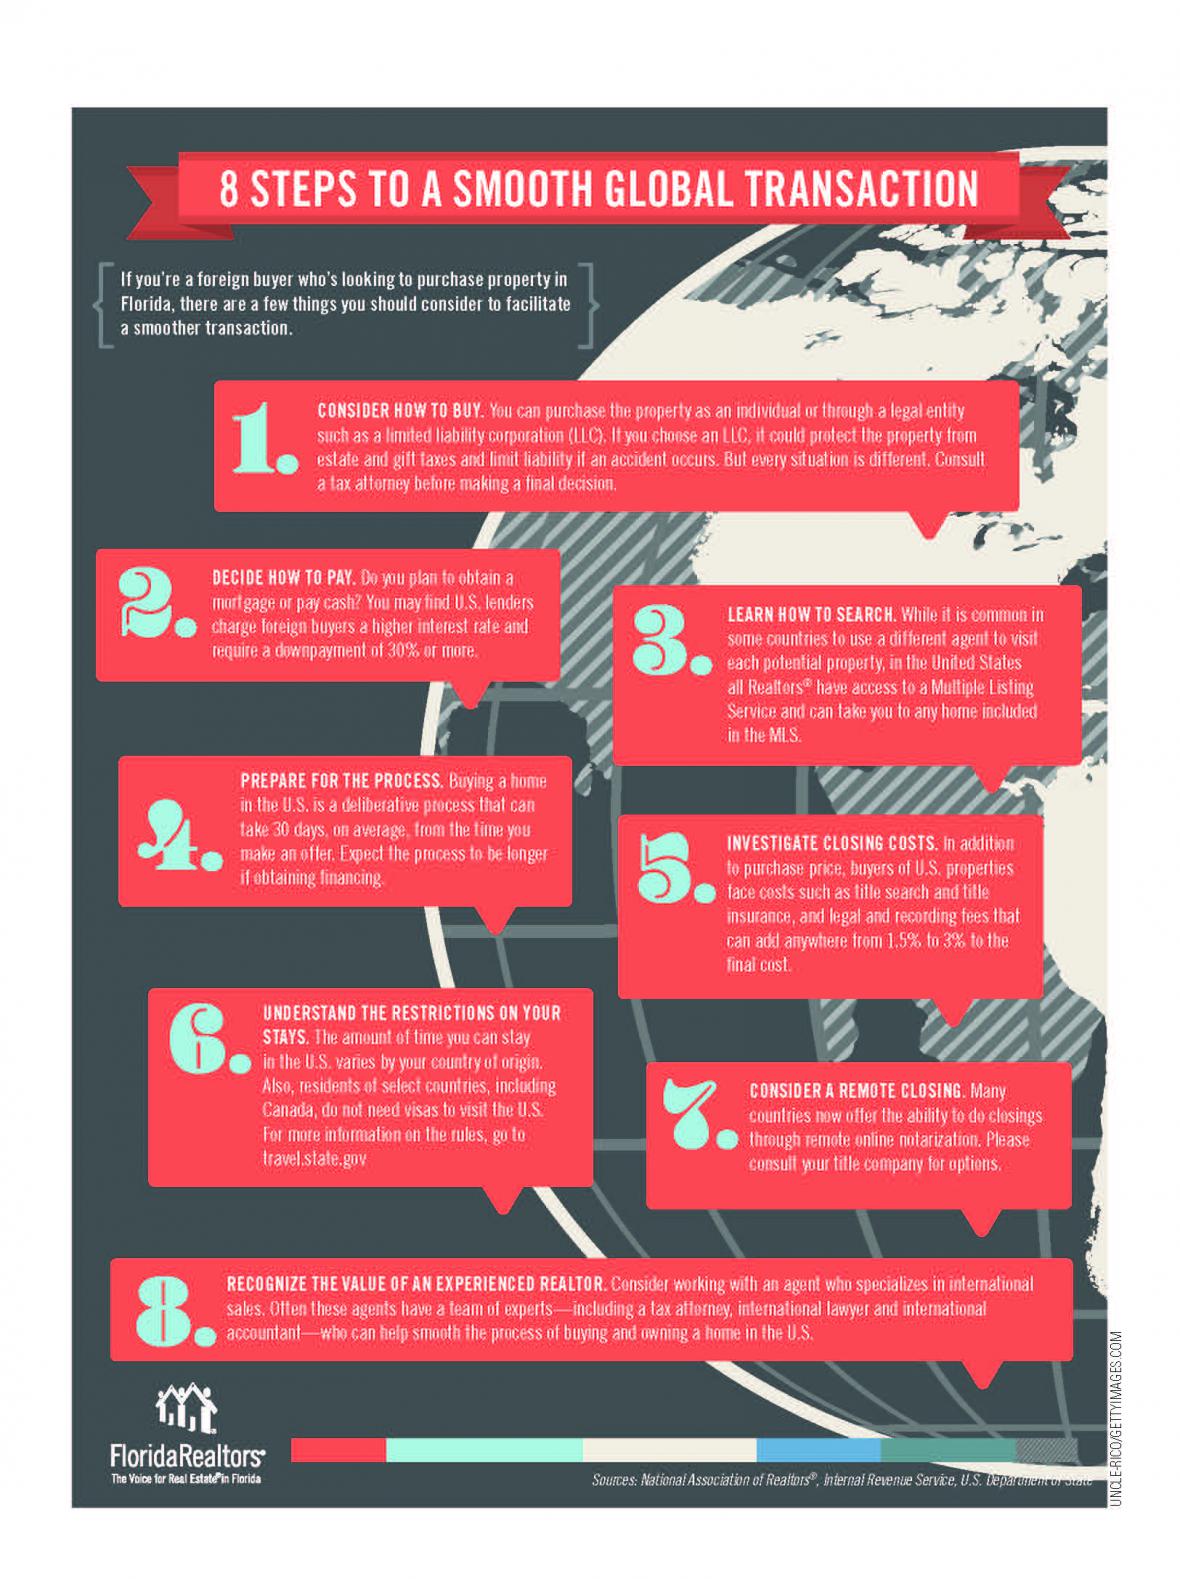 8 Steps to A Smooth Global Transaction infographic